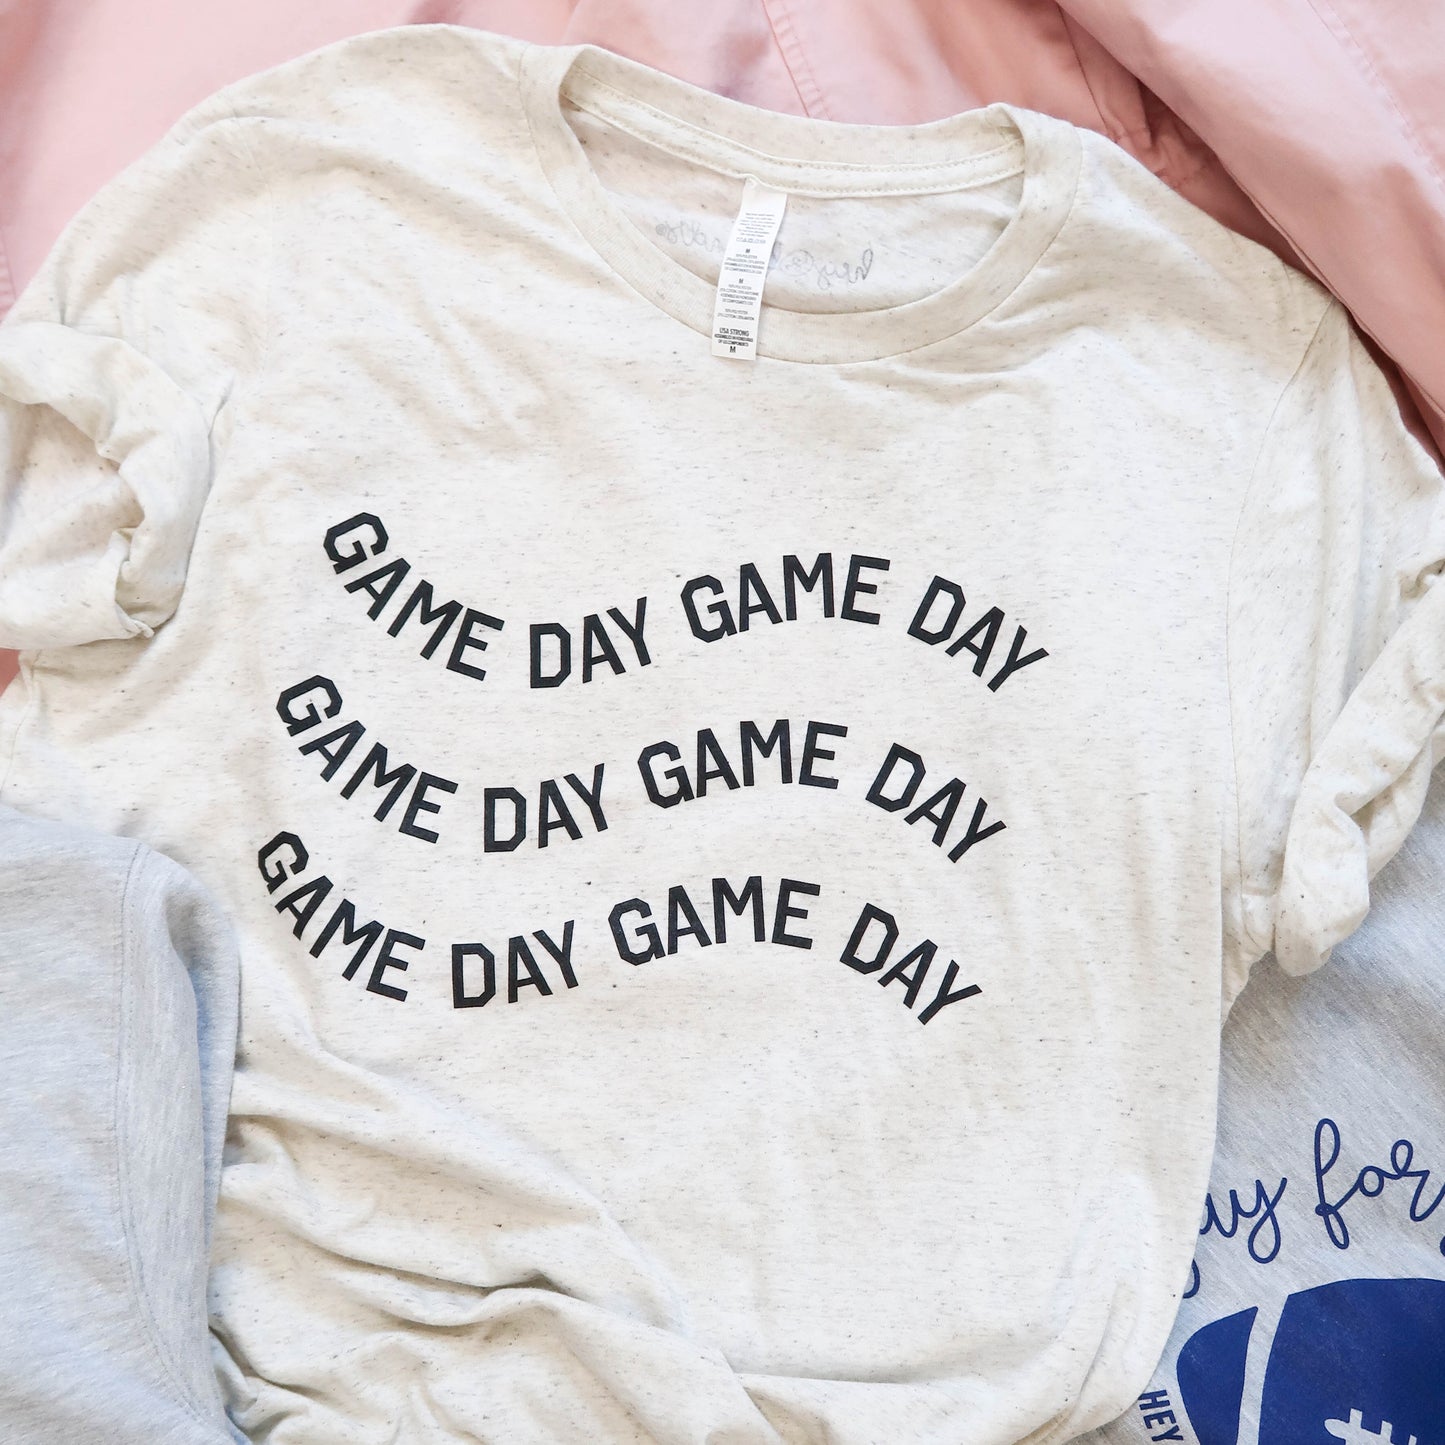 Game Day x3 Tee